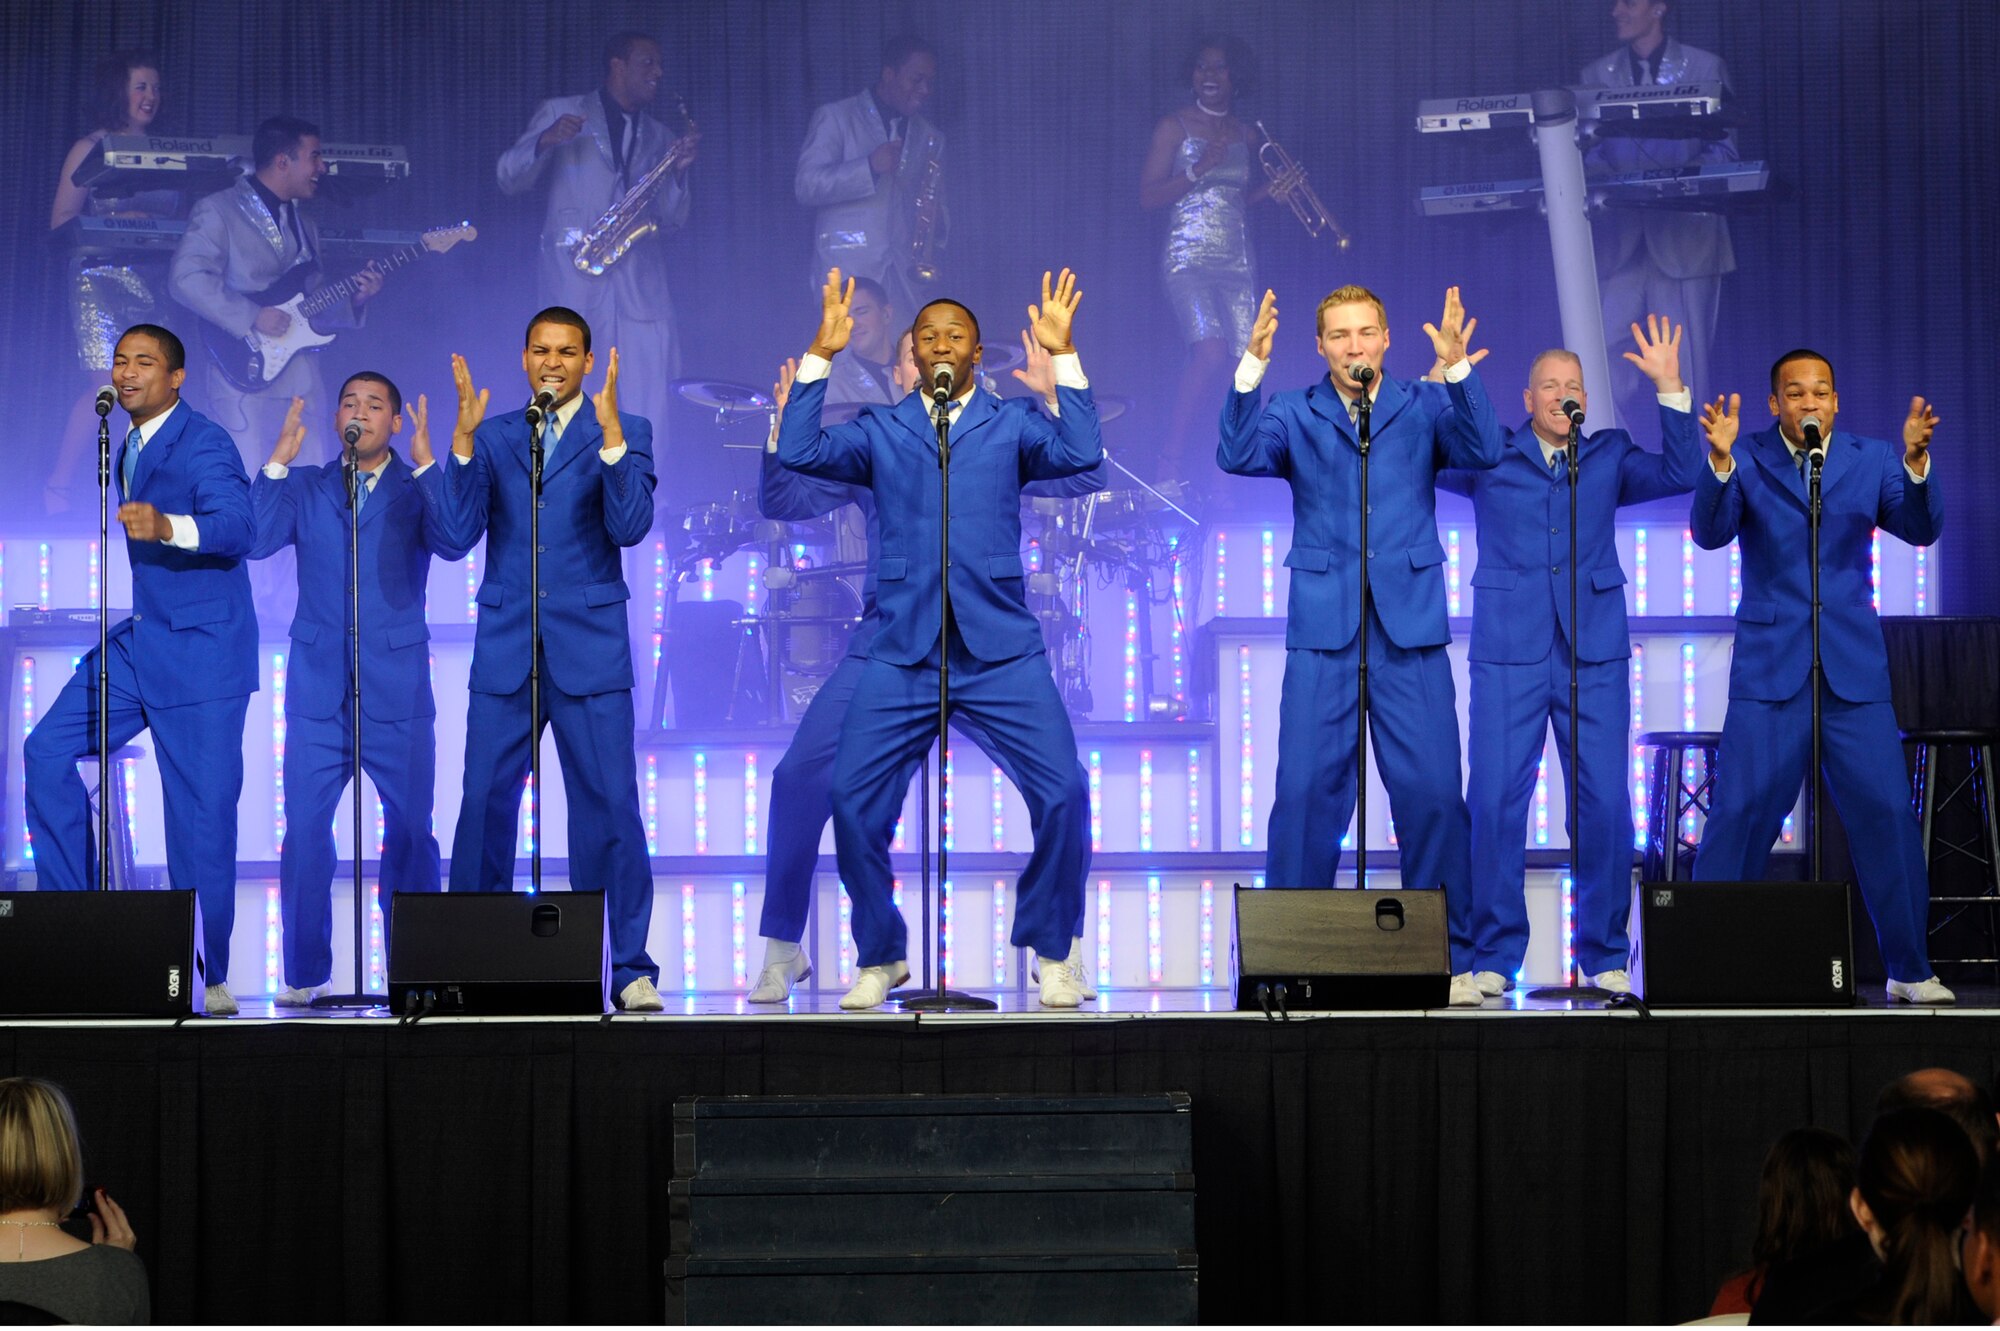 Members of Tops and Blue perform at the duel-bay hangar on tour at Ramstein Air Base, Germany, Oct. 21, 2012. The Tops in Blue 2012 World Tour, entitled “Listen,” has traveled across the United States and over 20 different countries. (U.S. Air Force photo/ Senior Airman Aaron-Forrest Wainwright)